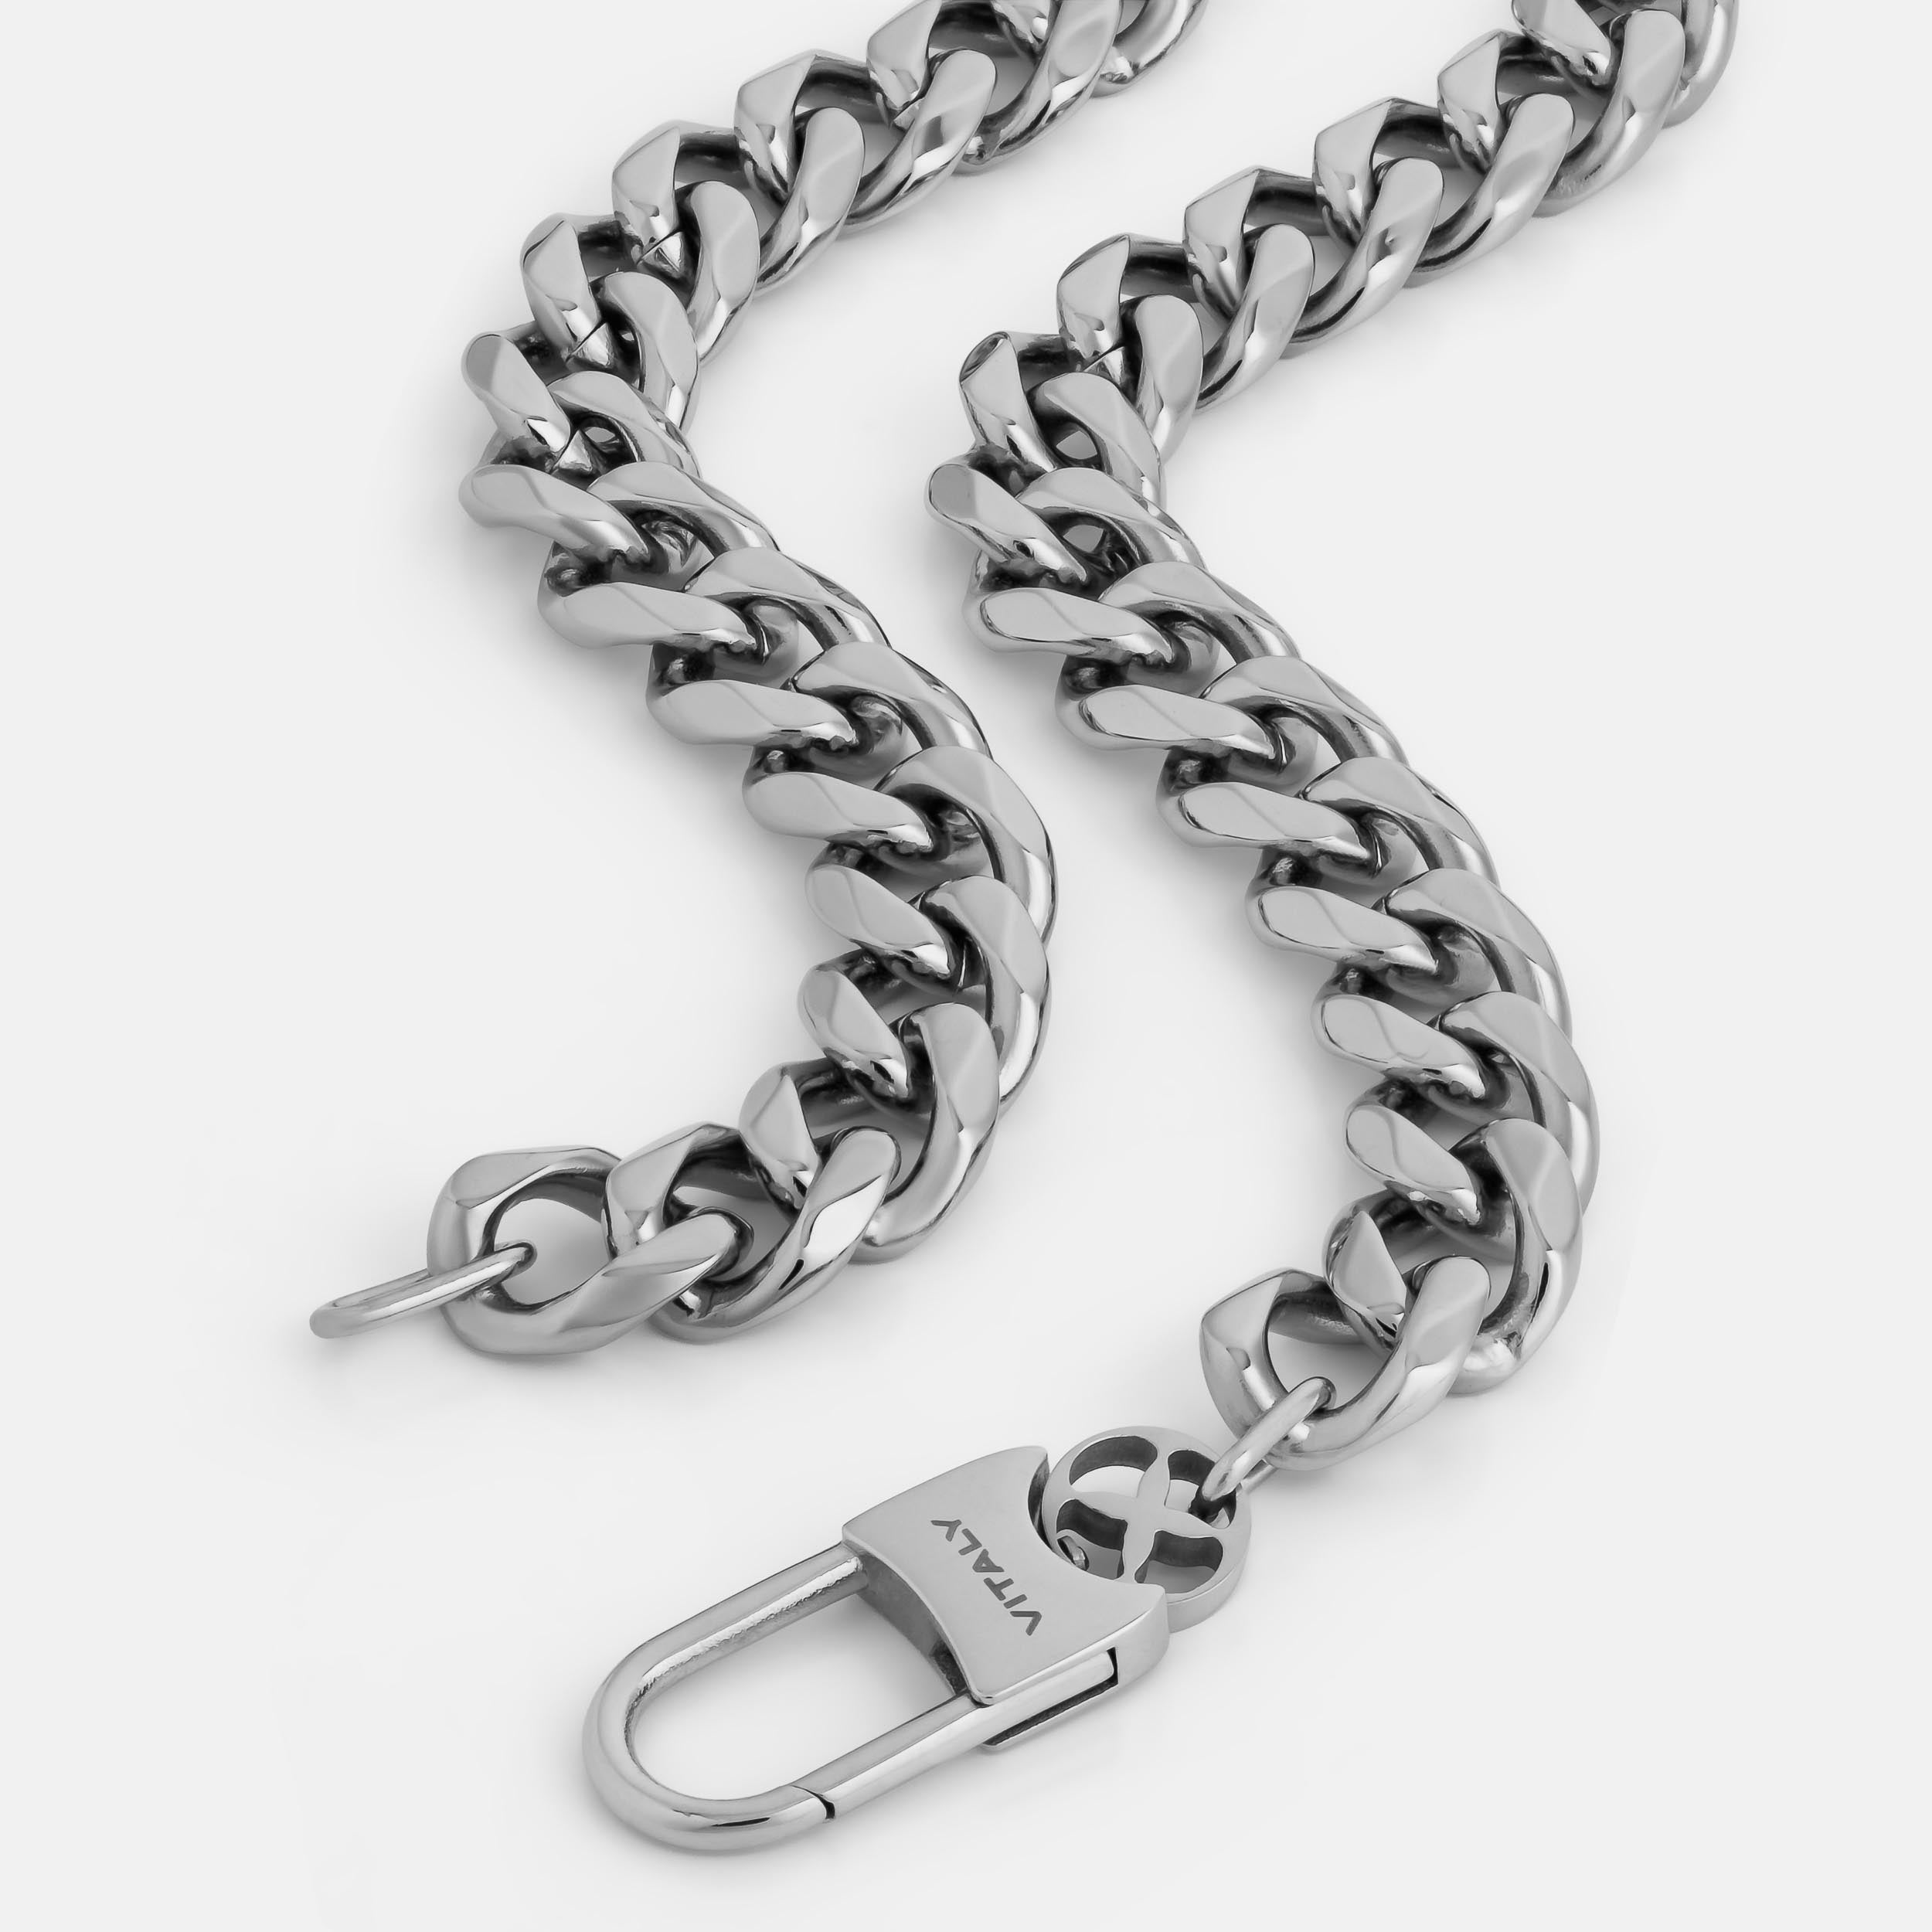 Vitaly Transit Choker Chain | 100% Recycled Stainless Steel